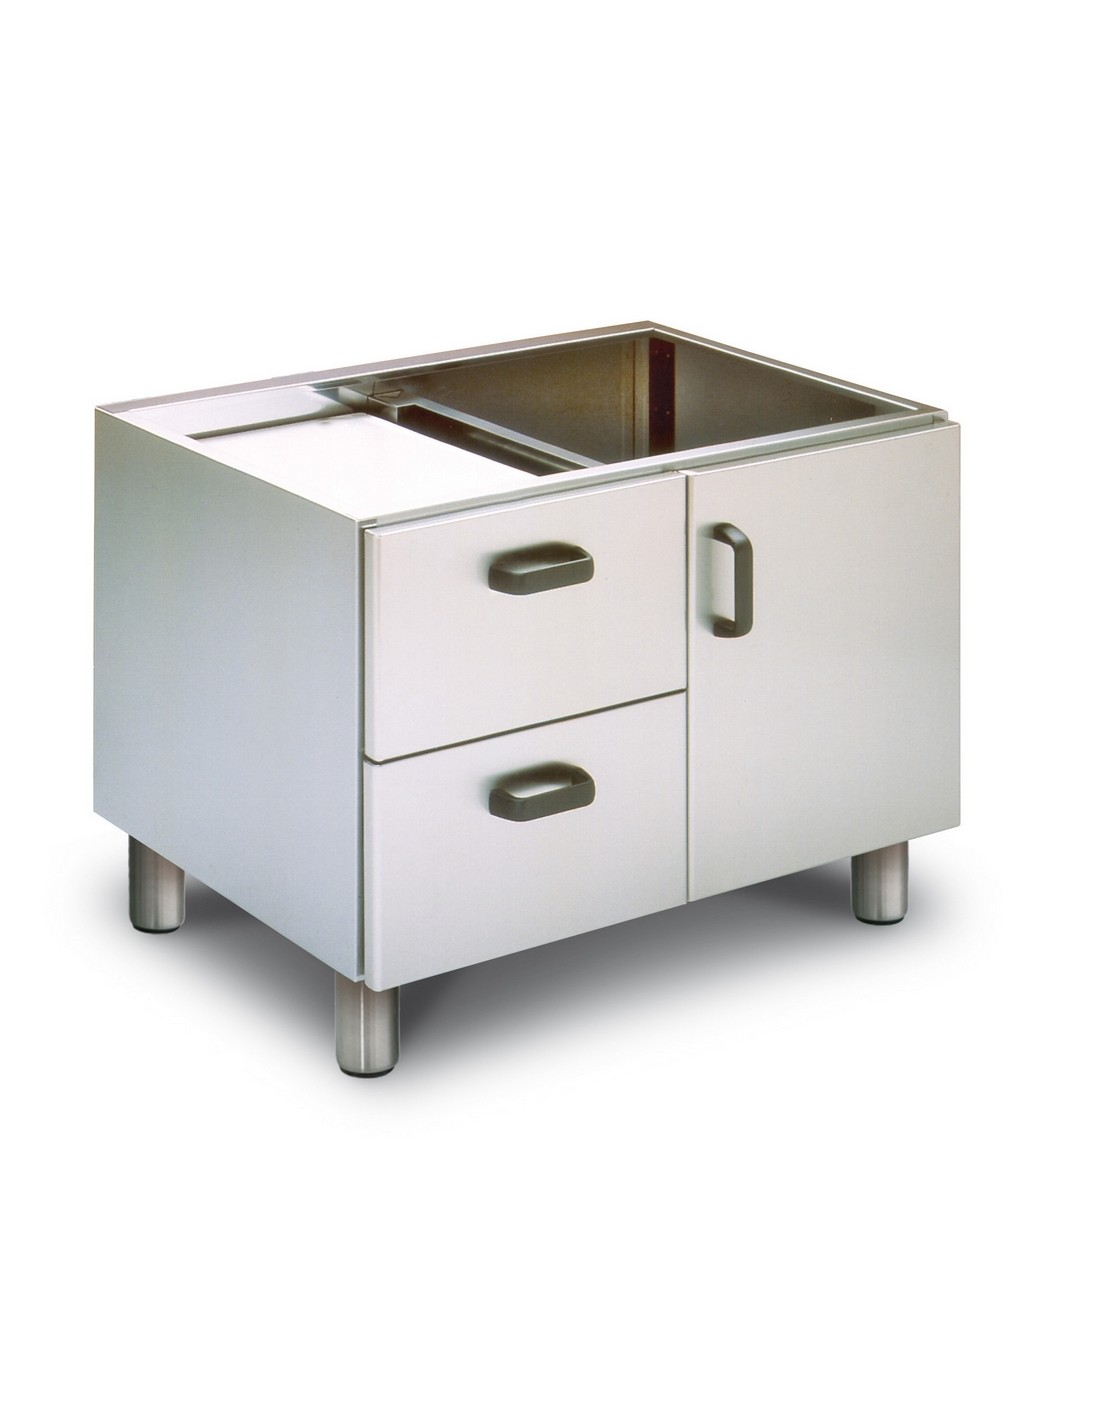 Base with door and drawers - N &176 2 x GN 1/1 h 15 - Plastic - Dimensions cm 80 x 61.5 x 60h